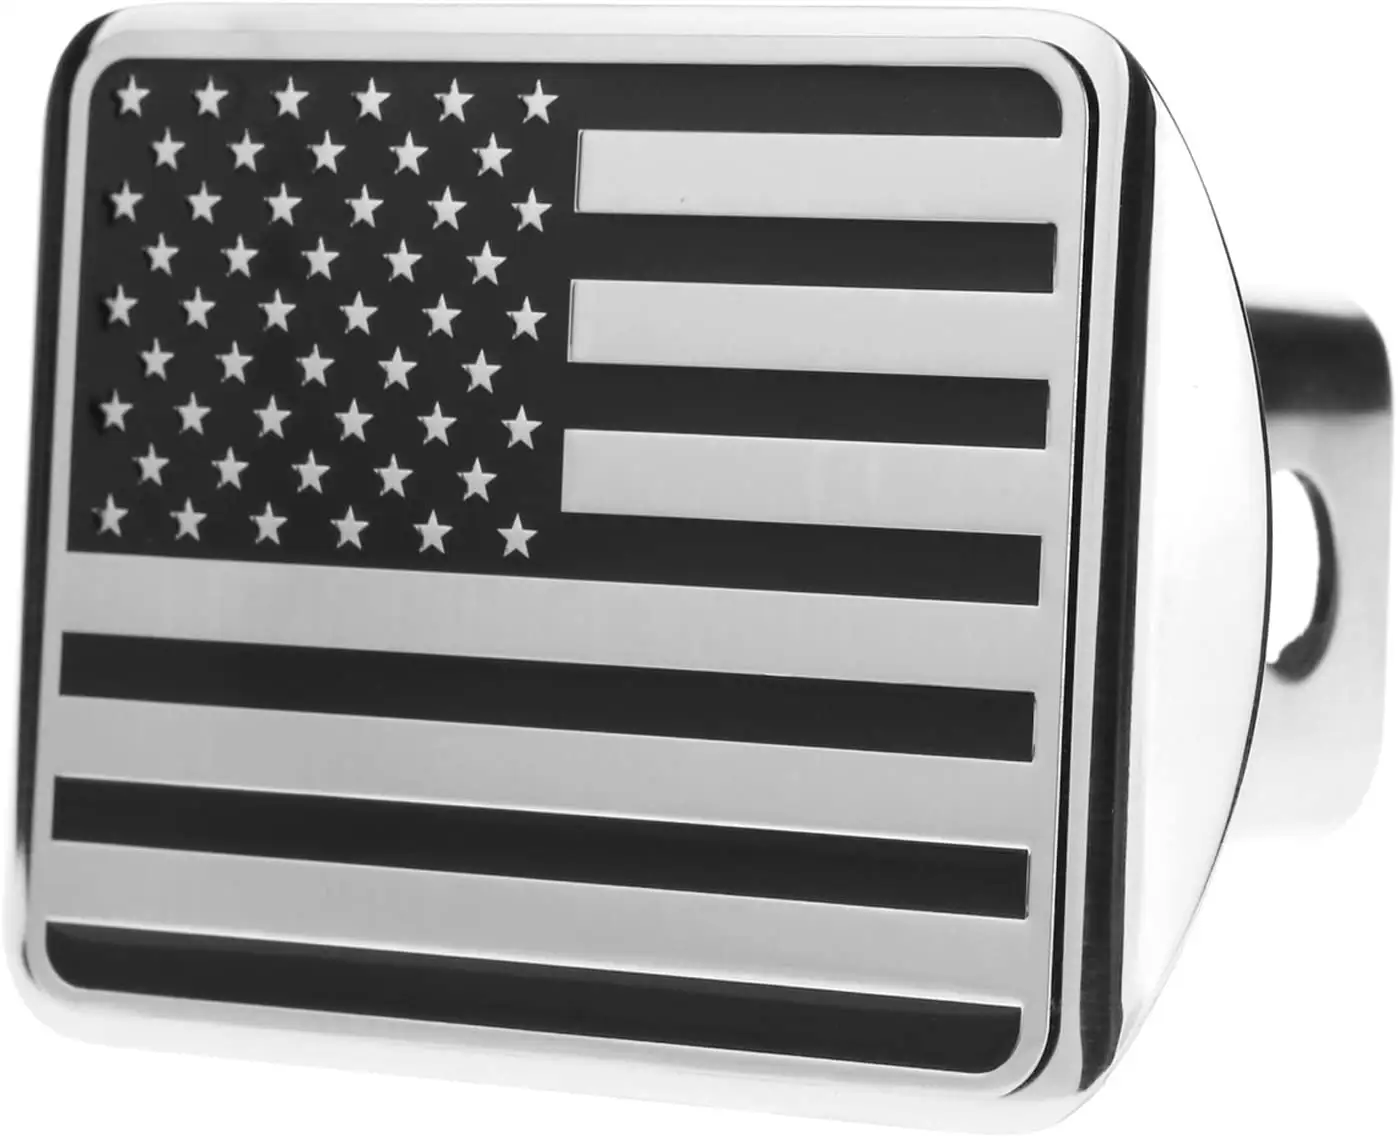 USA Flag Trailer Hitch Cover 3*4 inch Fits 2" Receivers